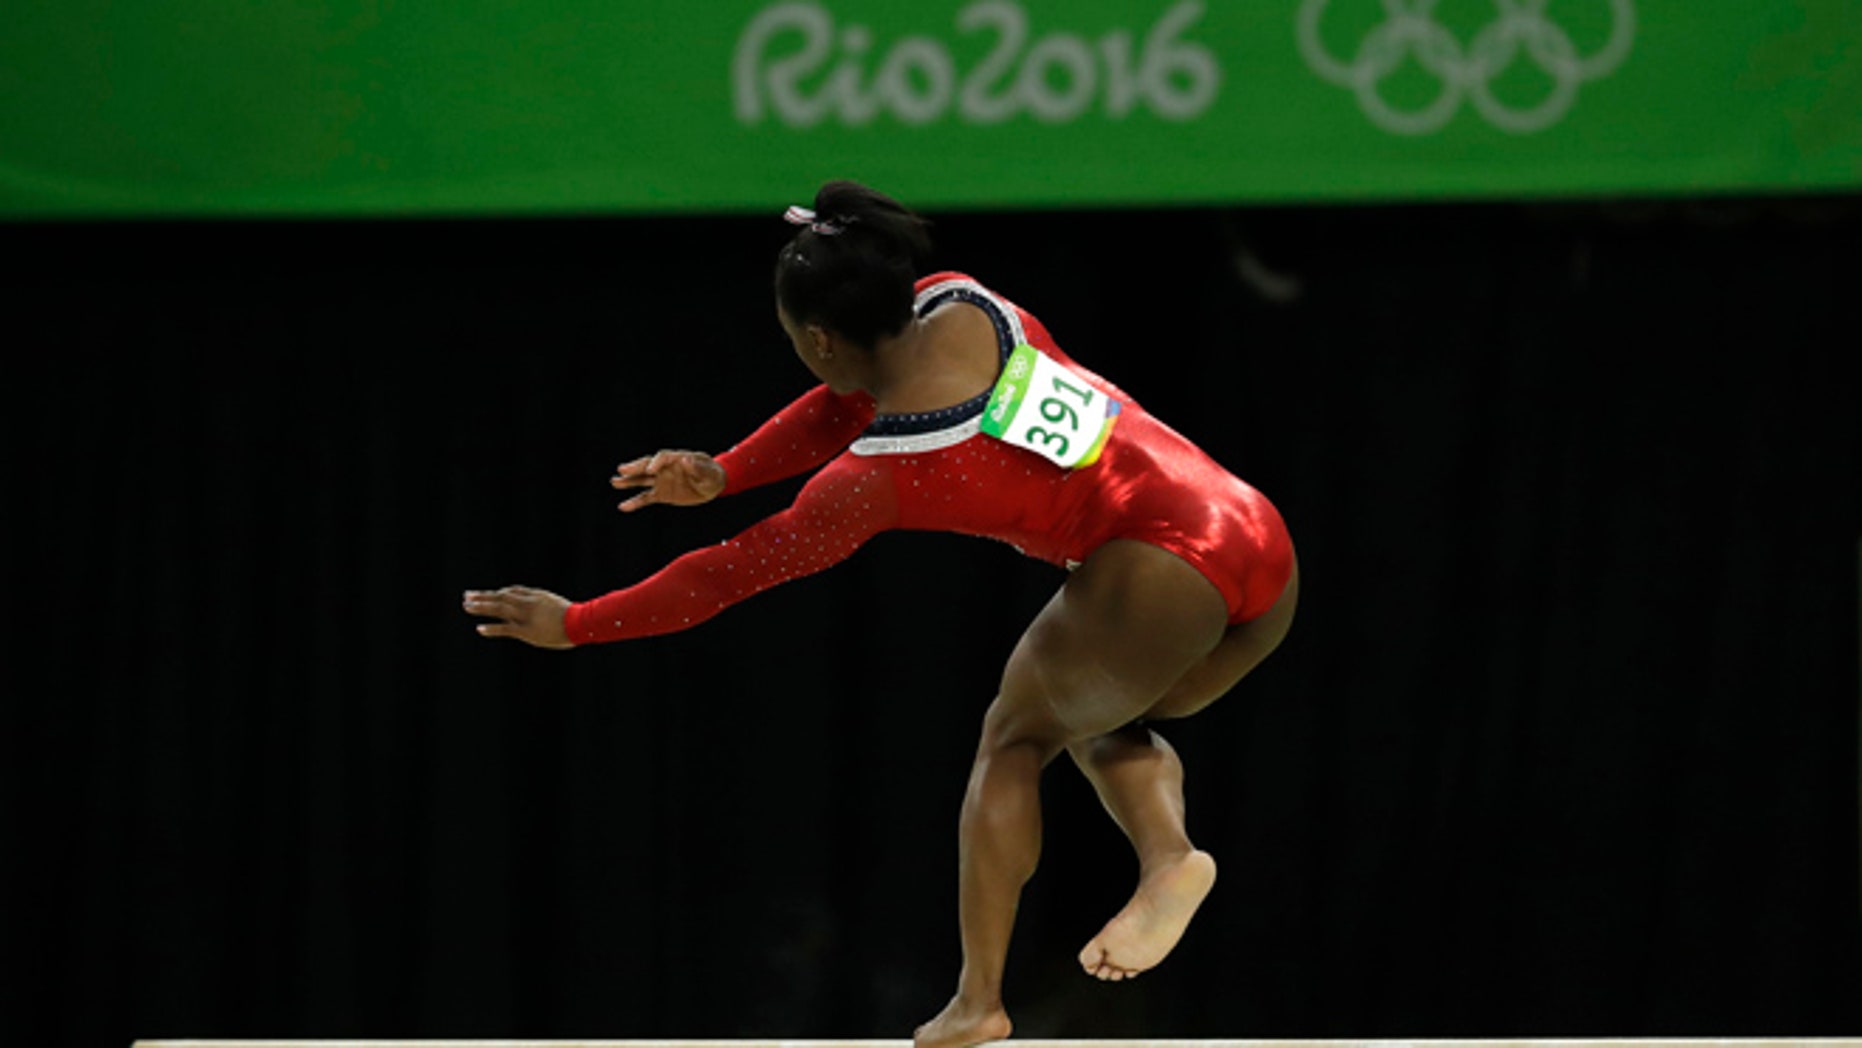 Biles Run At History Ends With Bronze In Beam Finals At Rio Fox News 8480